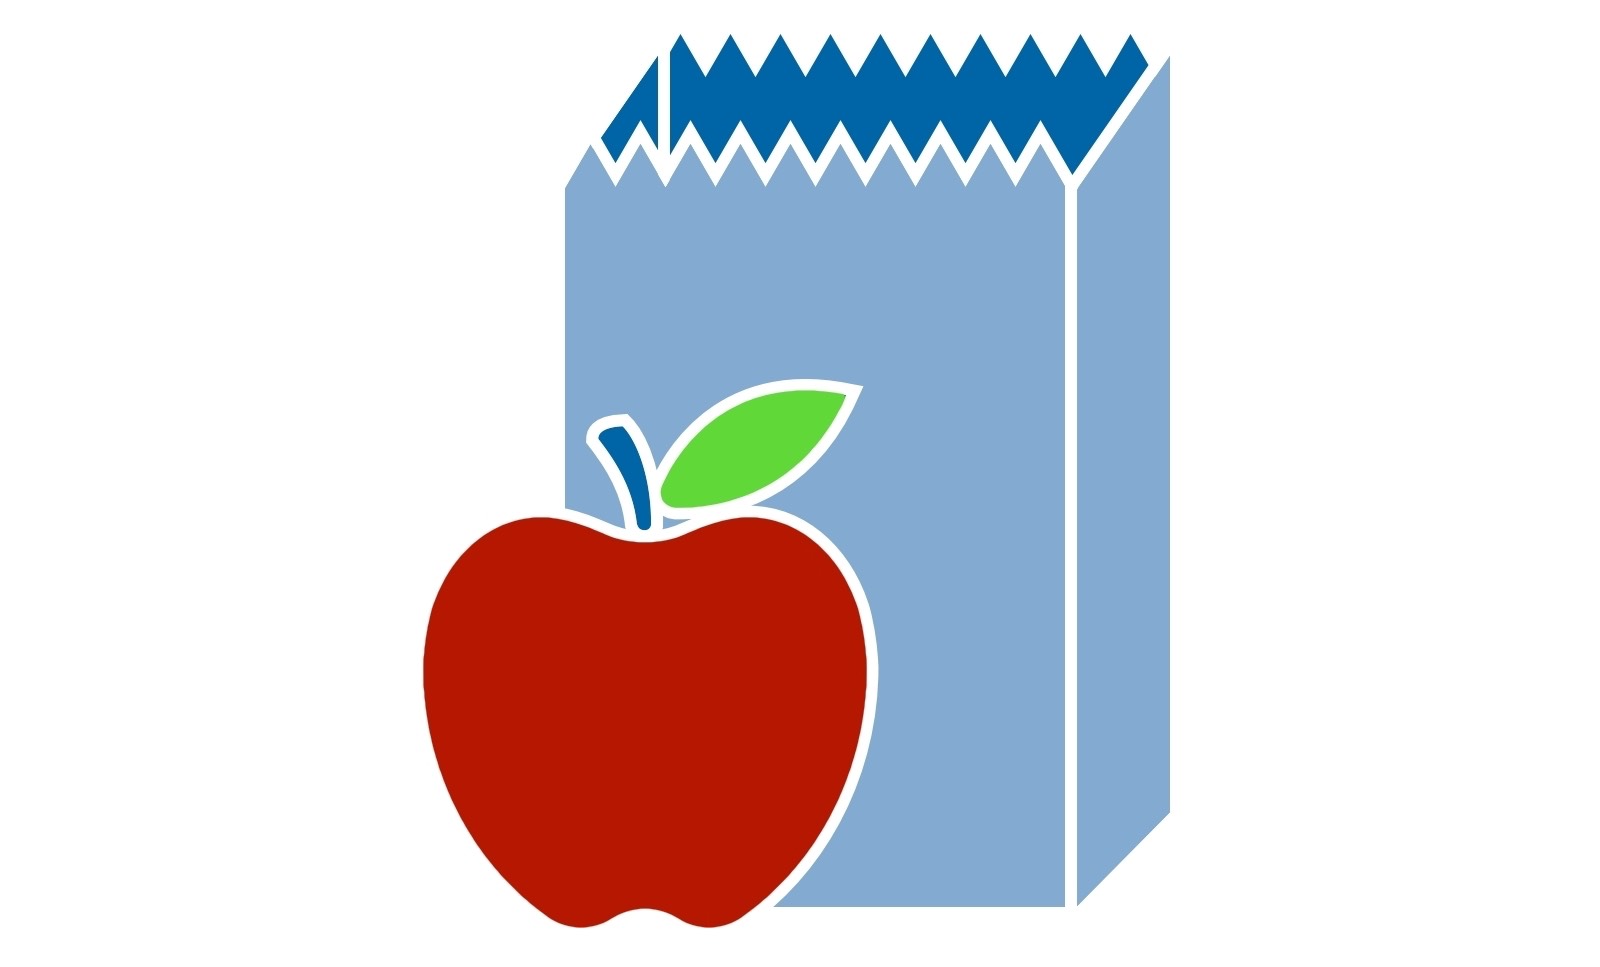 Image of a lunch bag with an apple